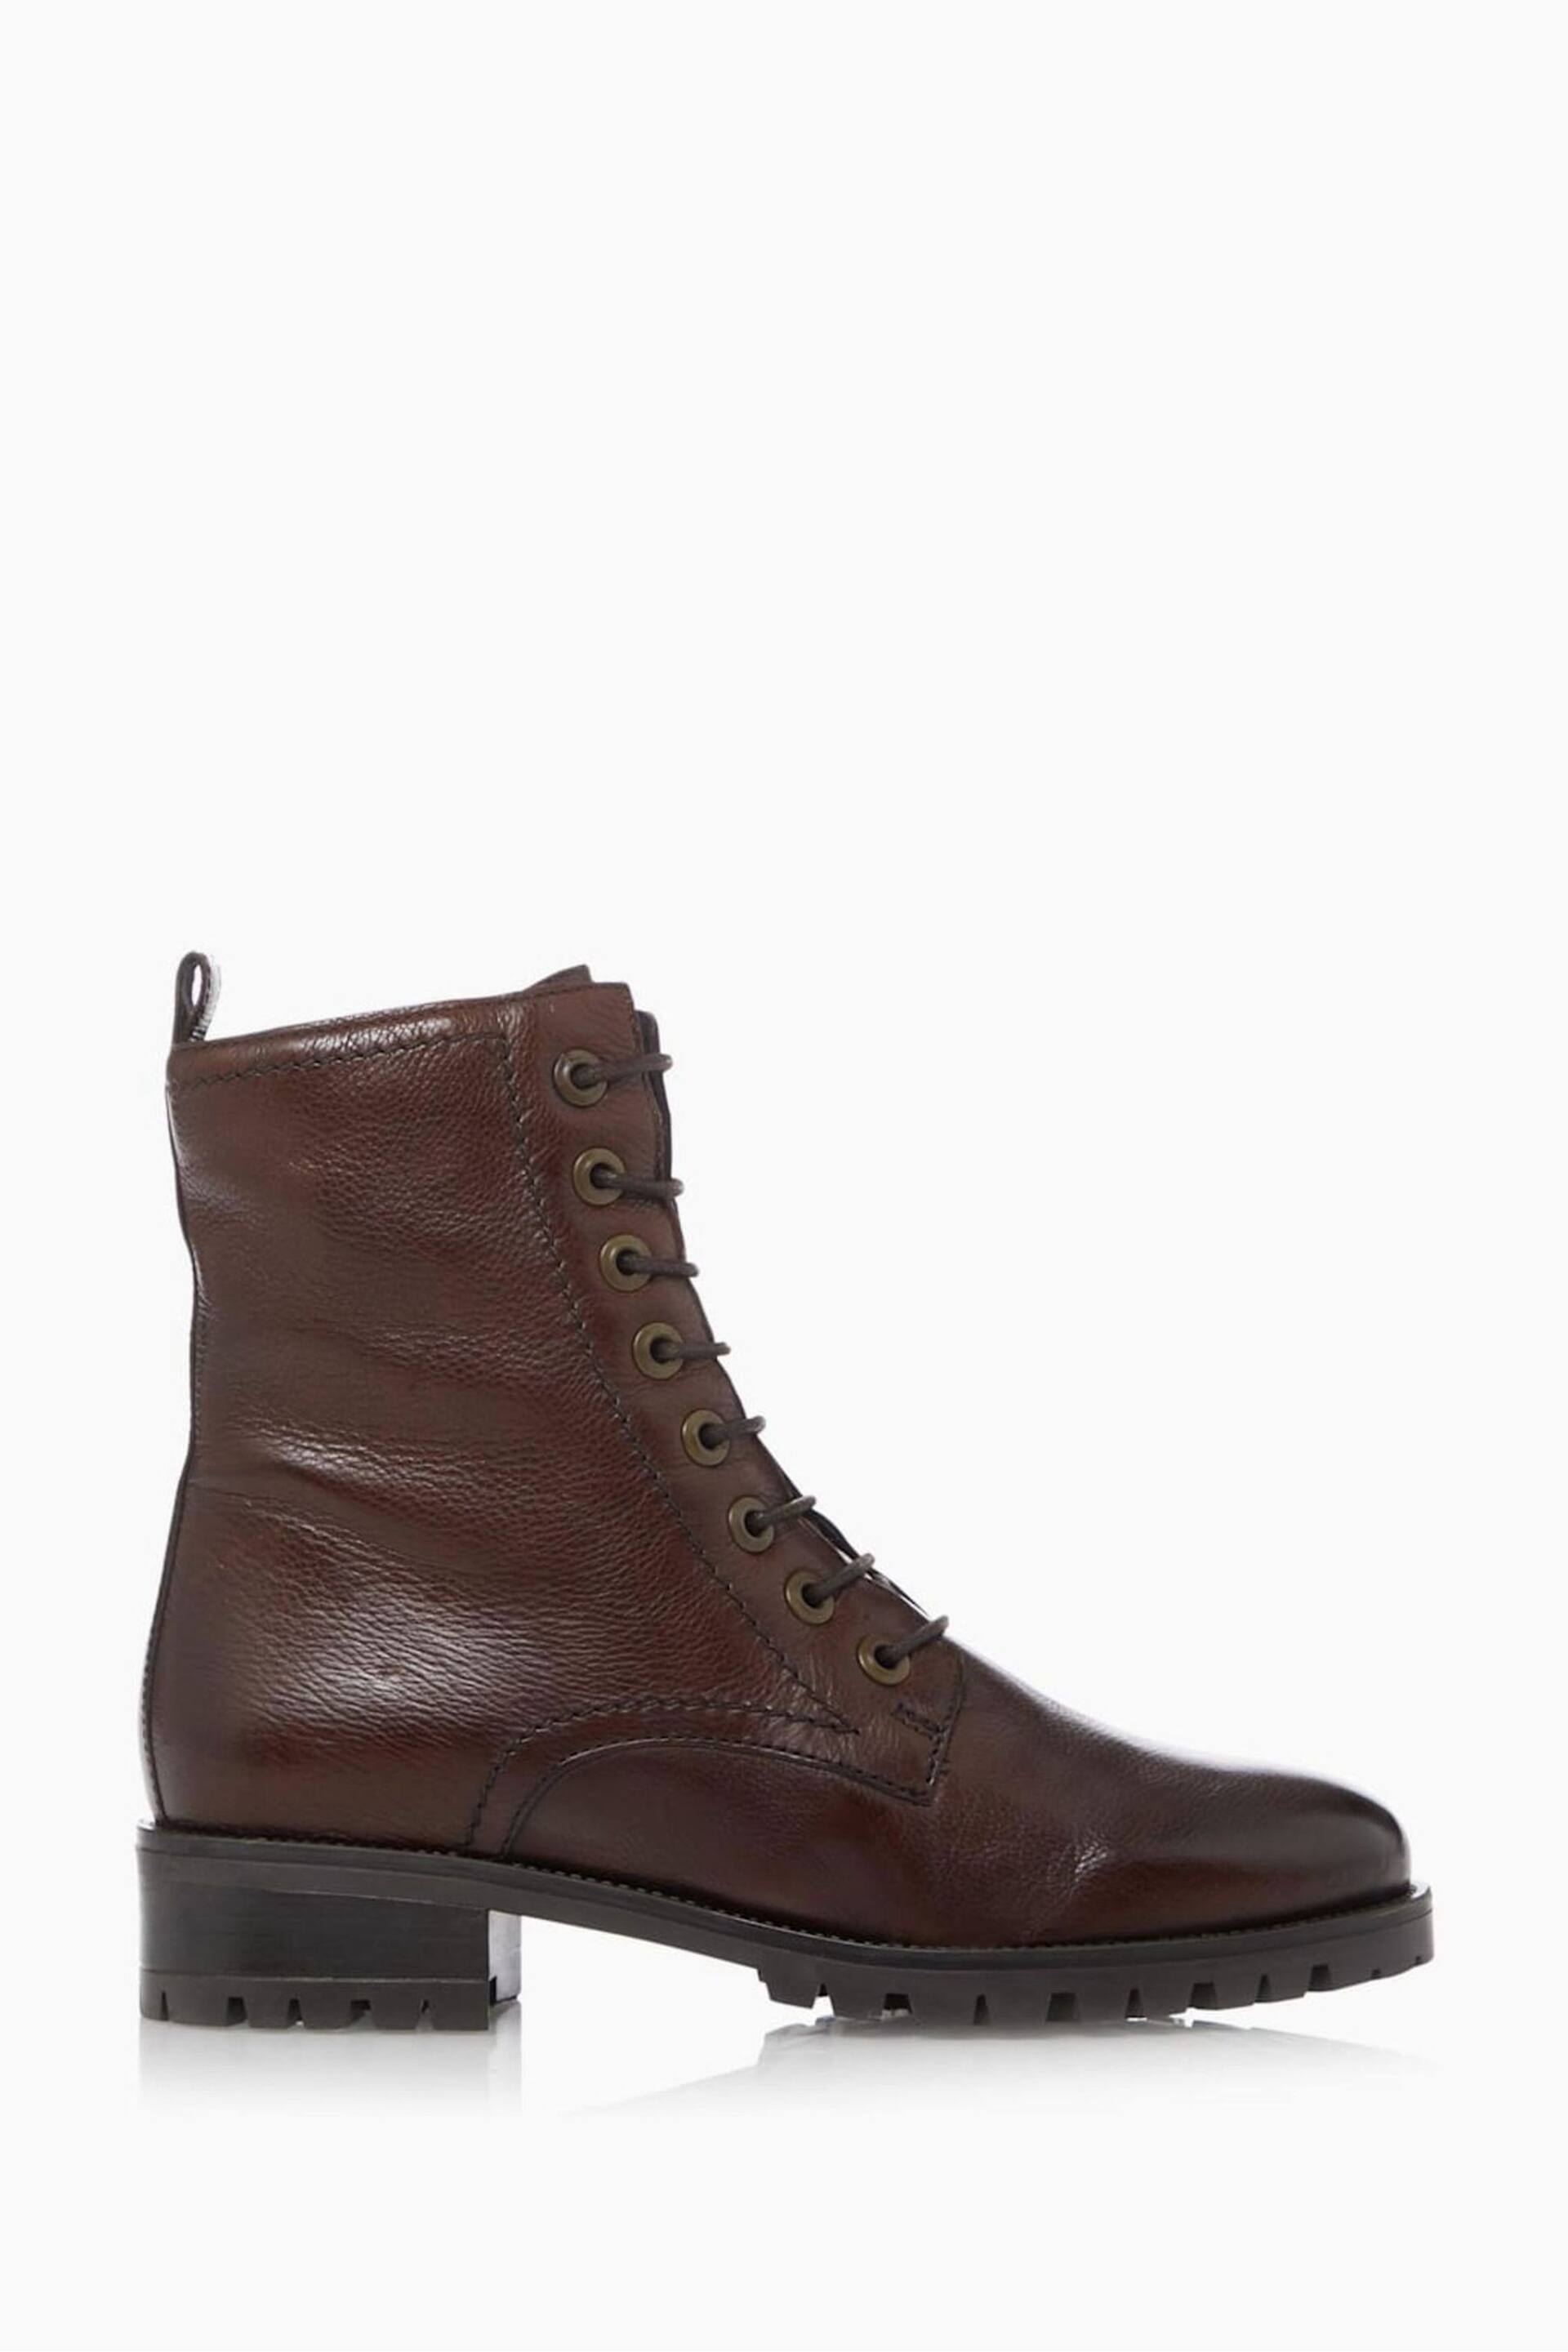 Dune London Brown Wide Fit Prestone Cleated Hiker Boots - Image 1 of 5